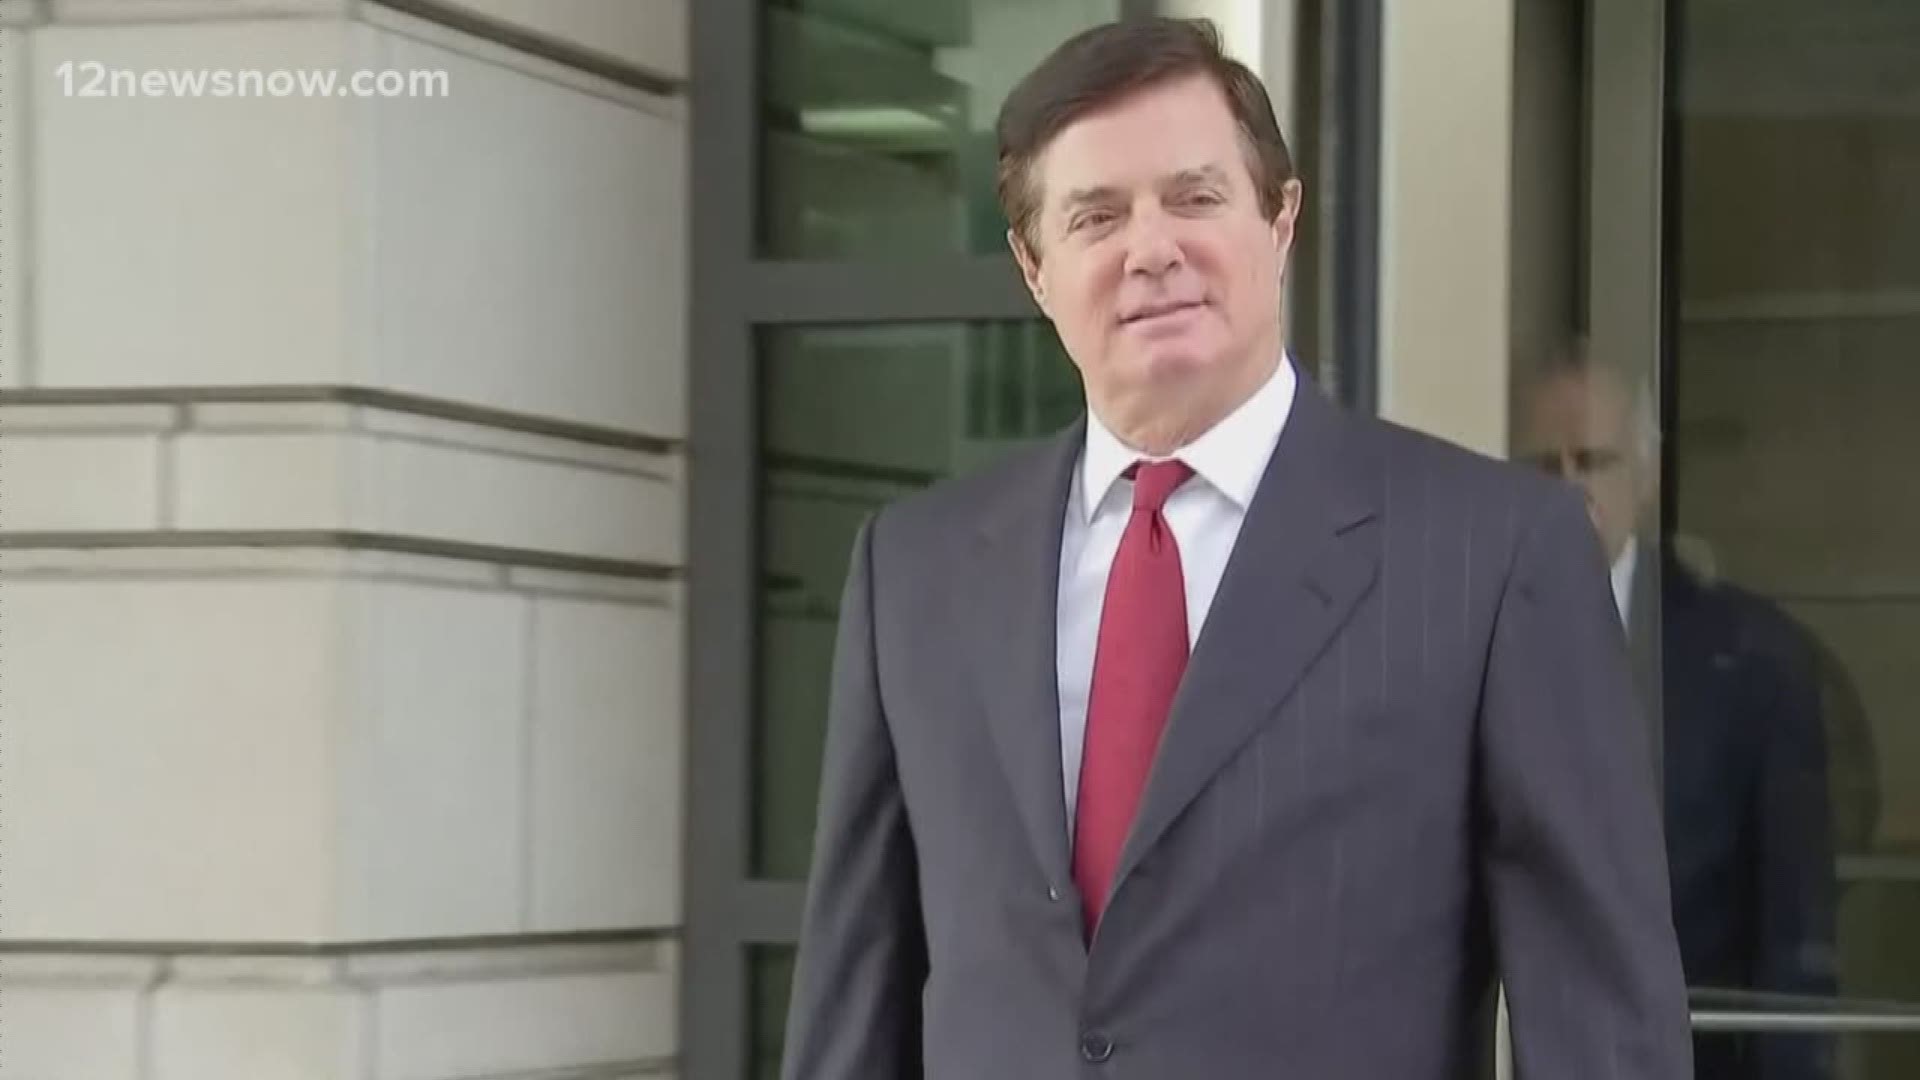 Paul Manafort is said to have been lying during Robert Mueller's Russia investigation. This will take away any deal of a lighter sentence to Manahort that was previously agreed upon.